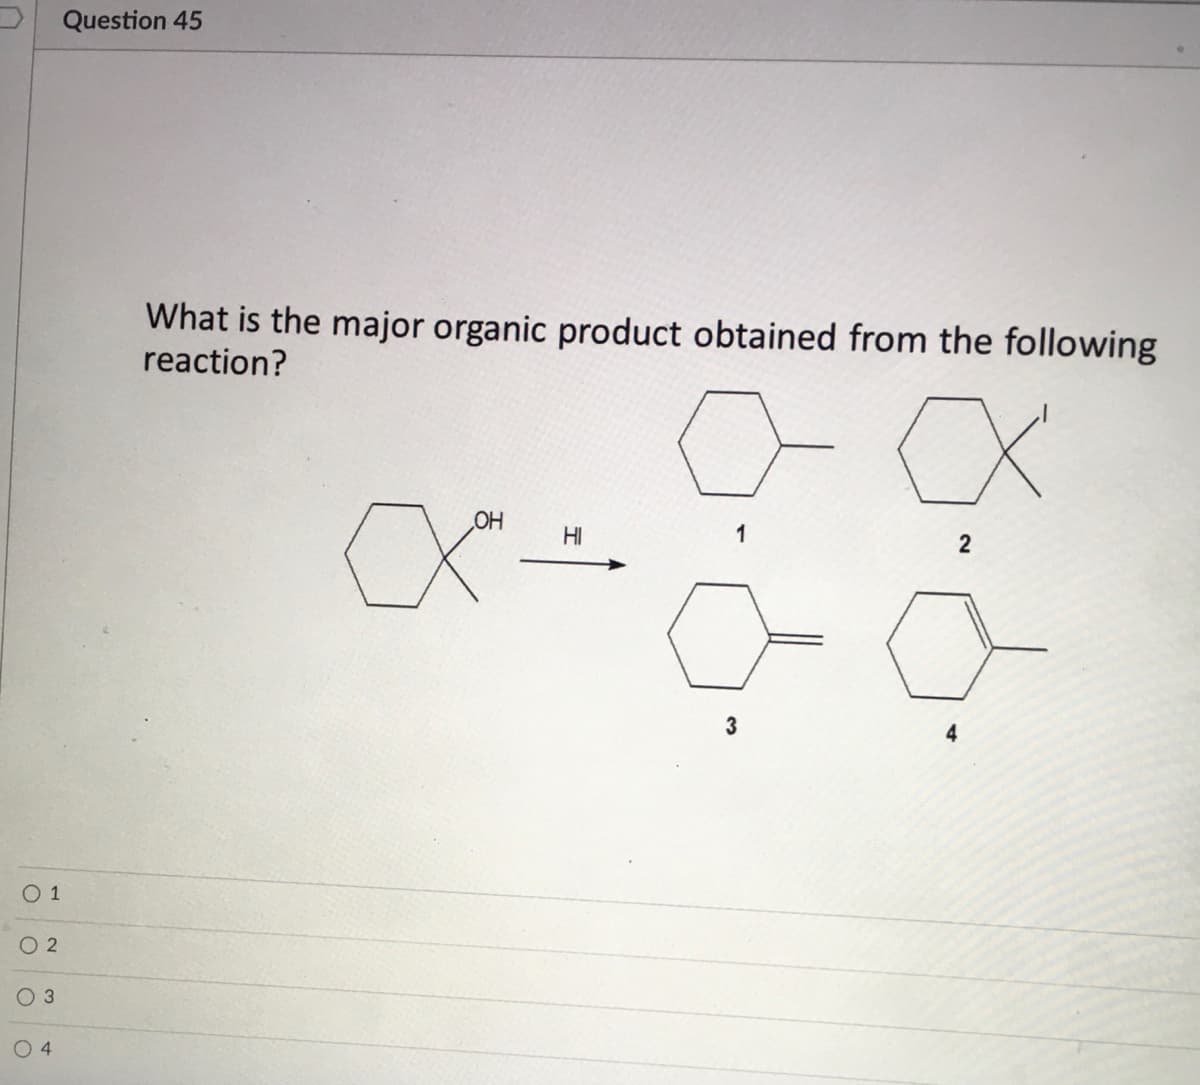 Question 45
What is the major organic product obtained from the following
reaction?
OH
HI
2
O 1
O 2
O 3
4
